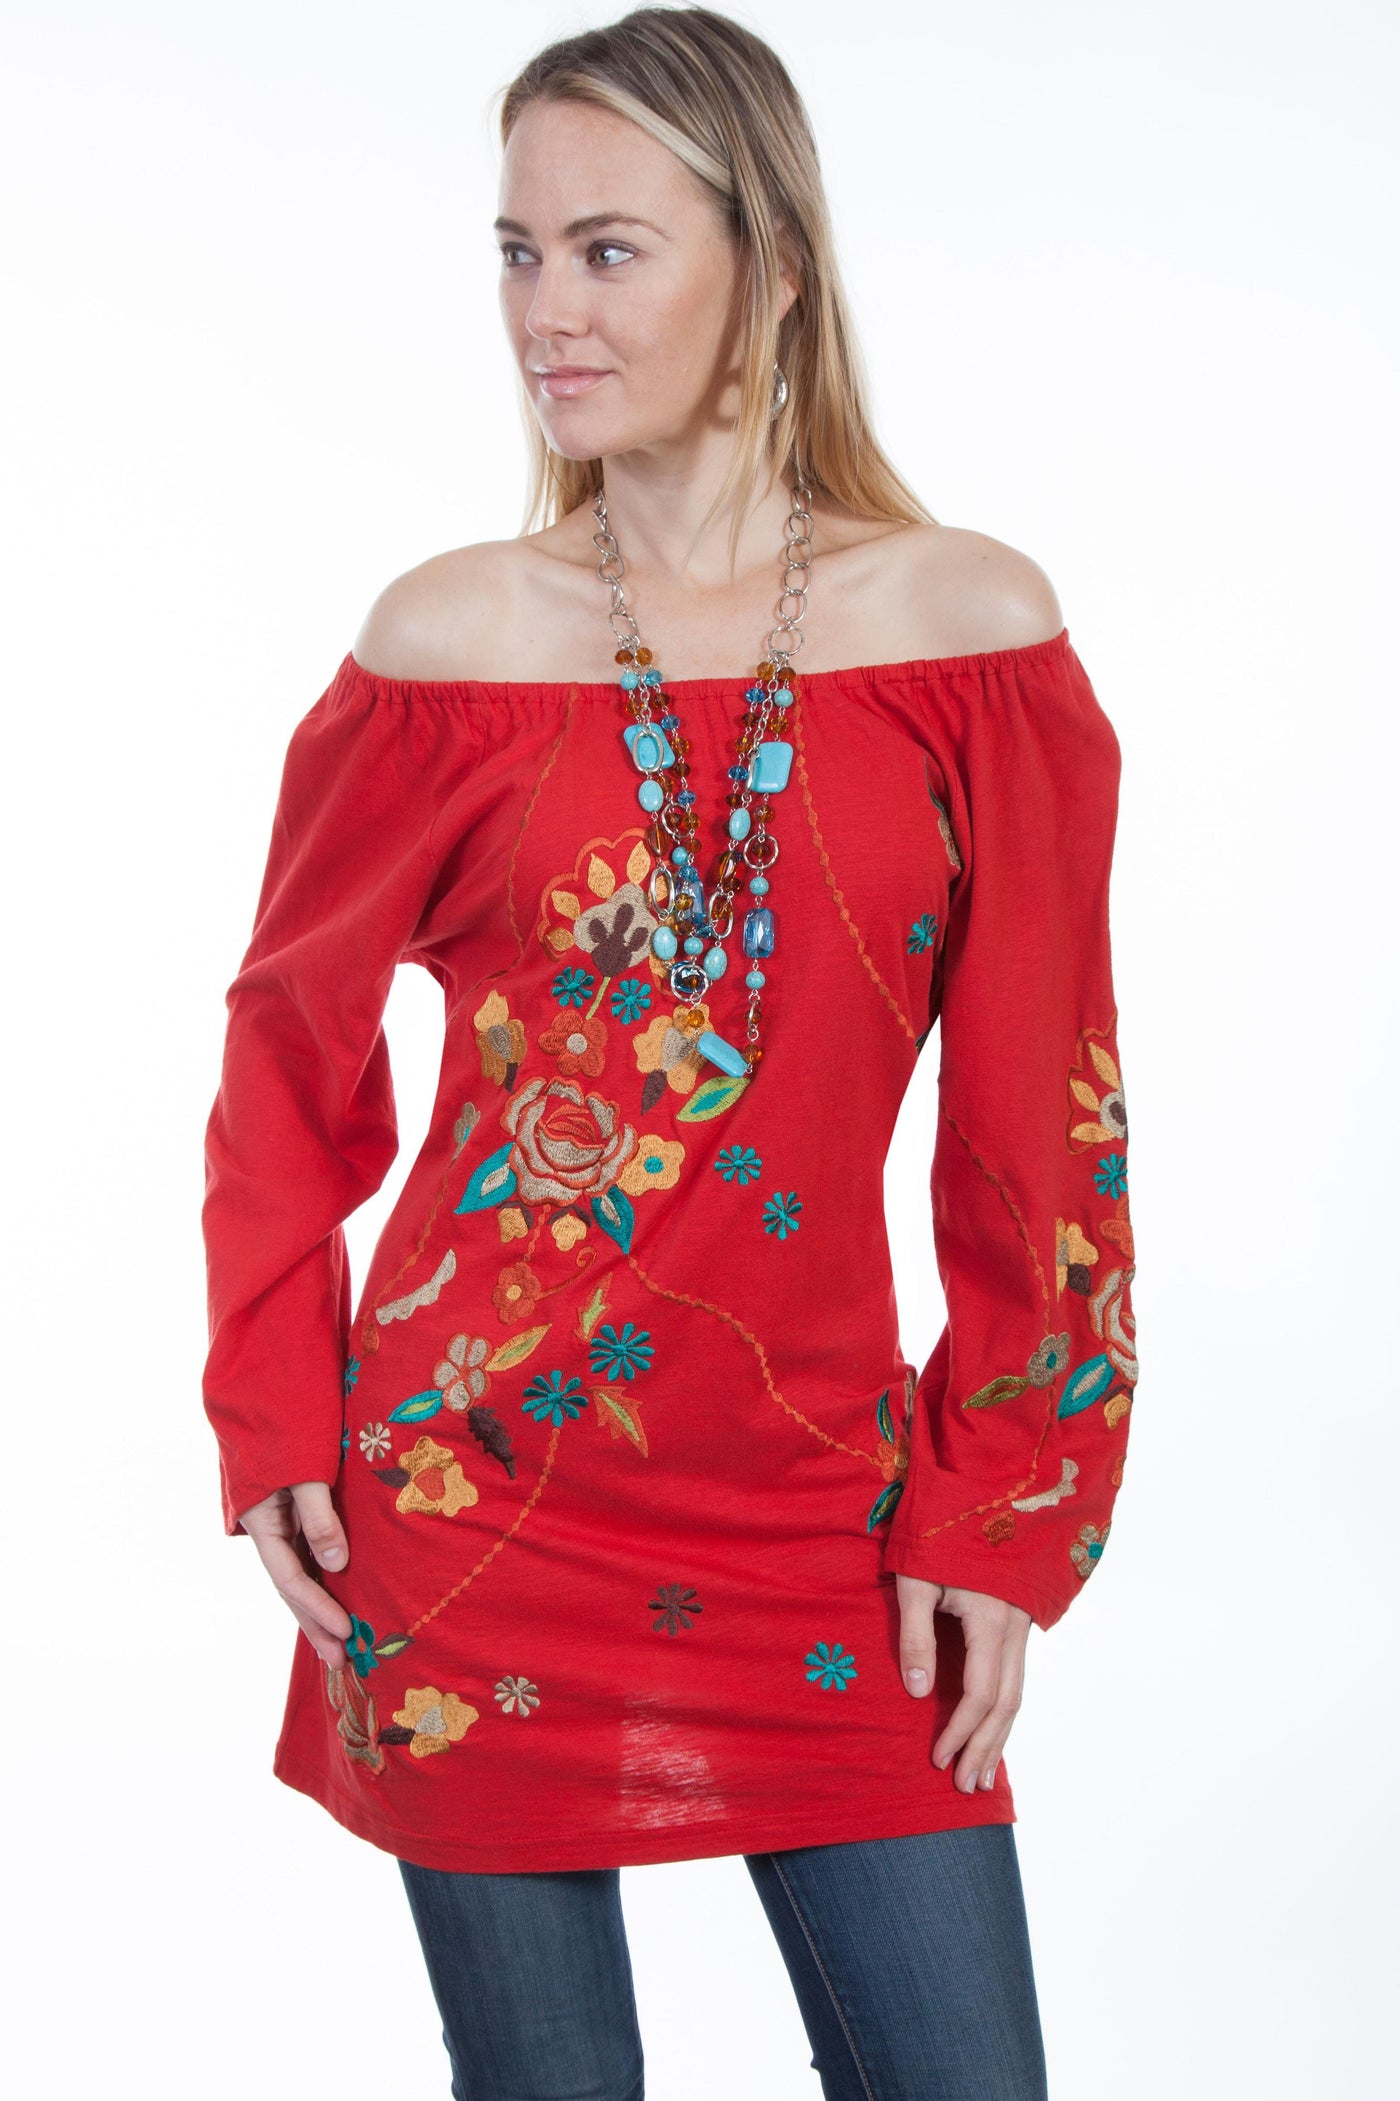 Desert Rose Cotton Tunic in Red - SOLD OUT